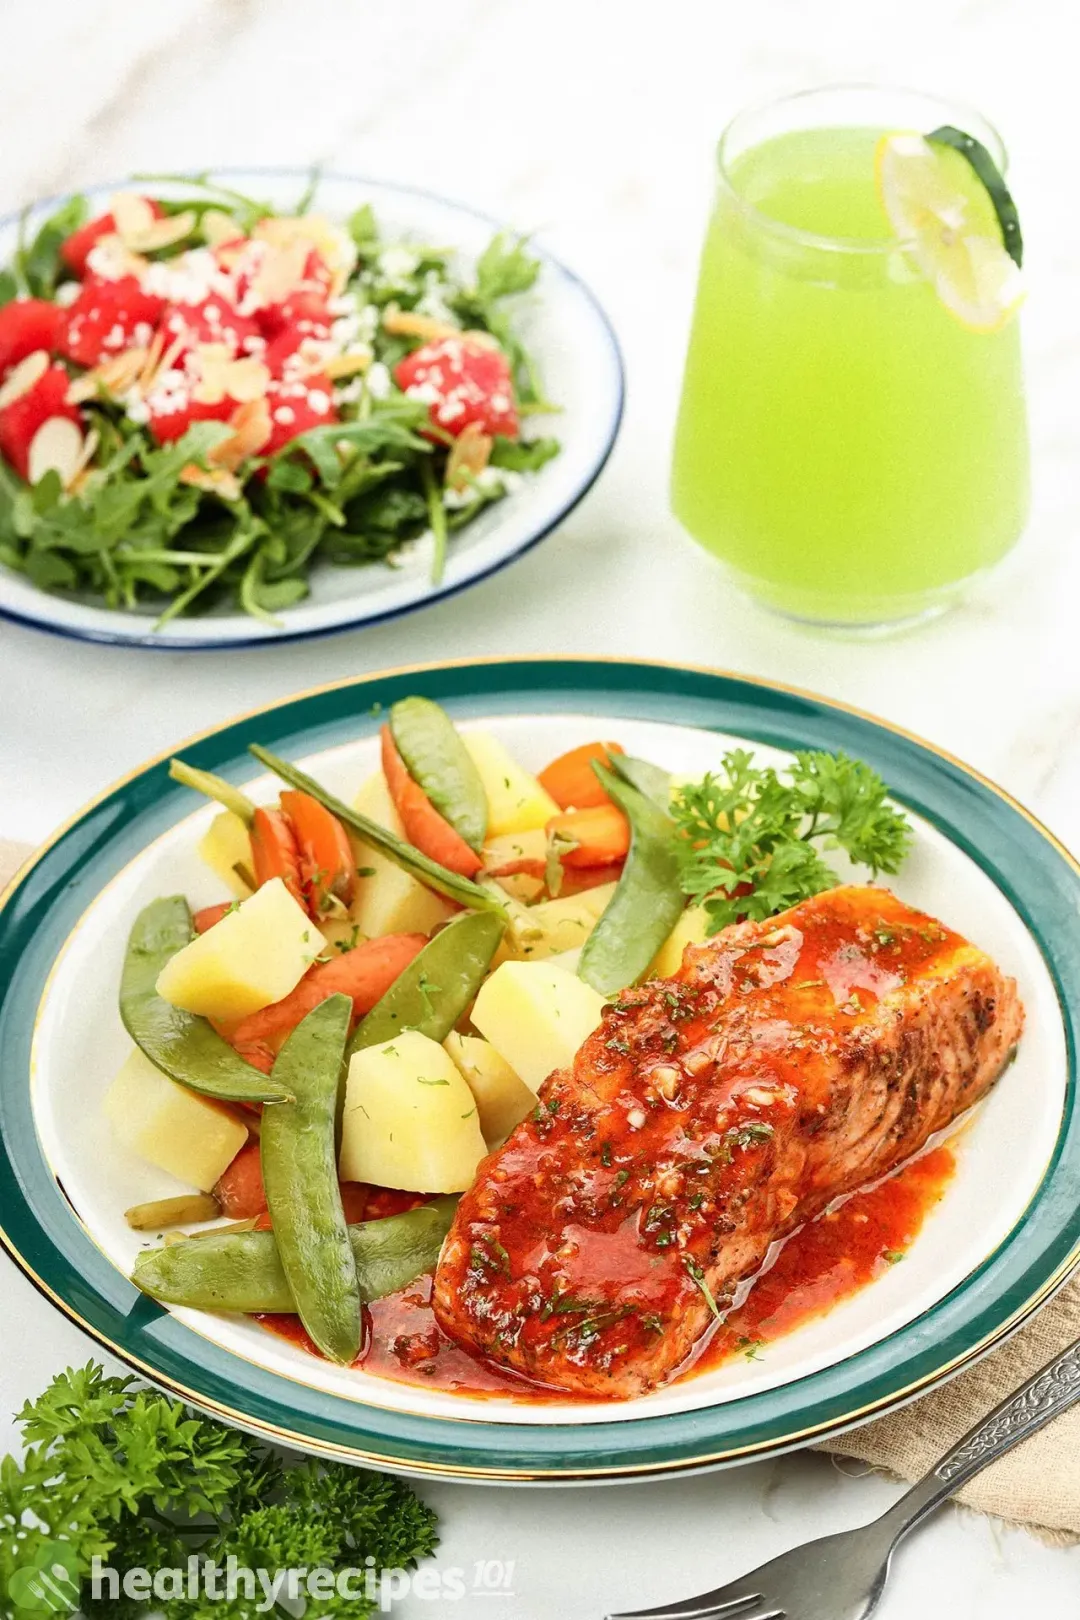 A plate of Intant Pot salmon and vegetables with a plate of watermelon arugula salad and a glass of cucumber and lemon juice on the background